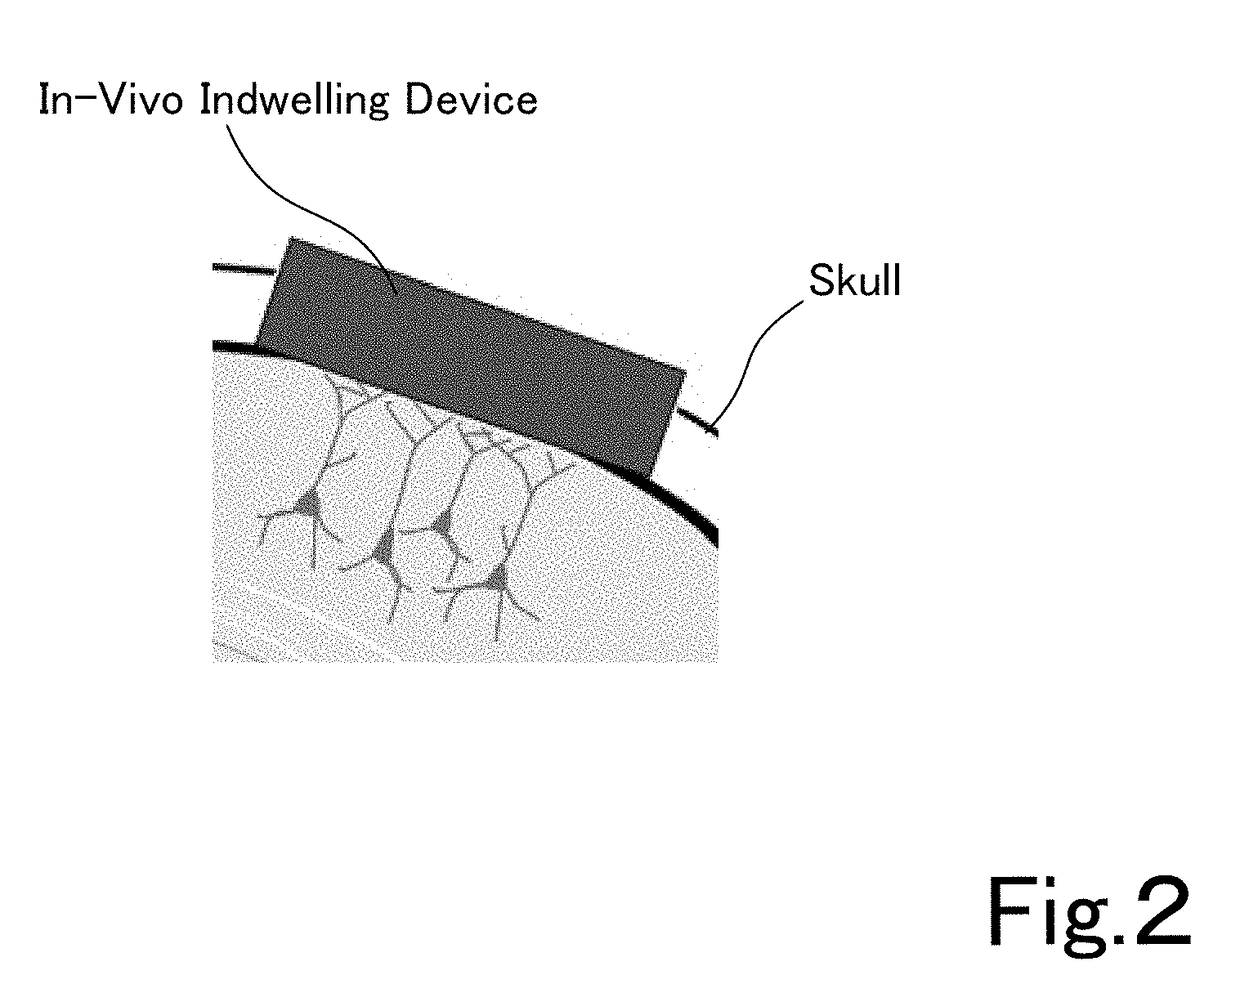 Translucent in-vivo indwelling device and utilization thereof